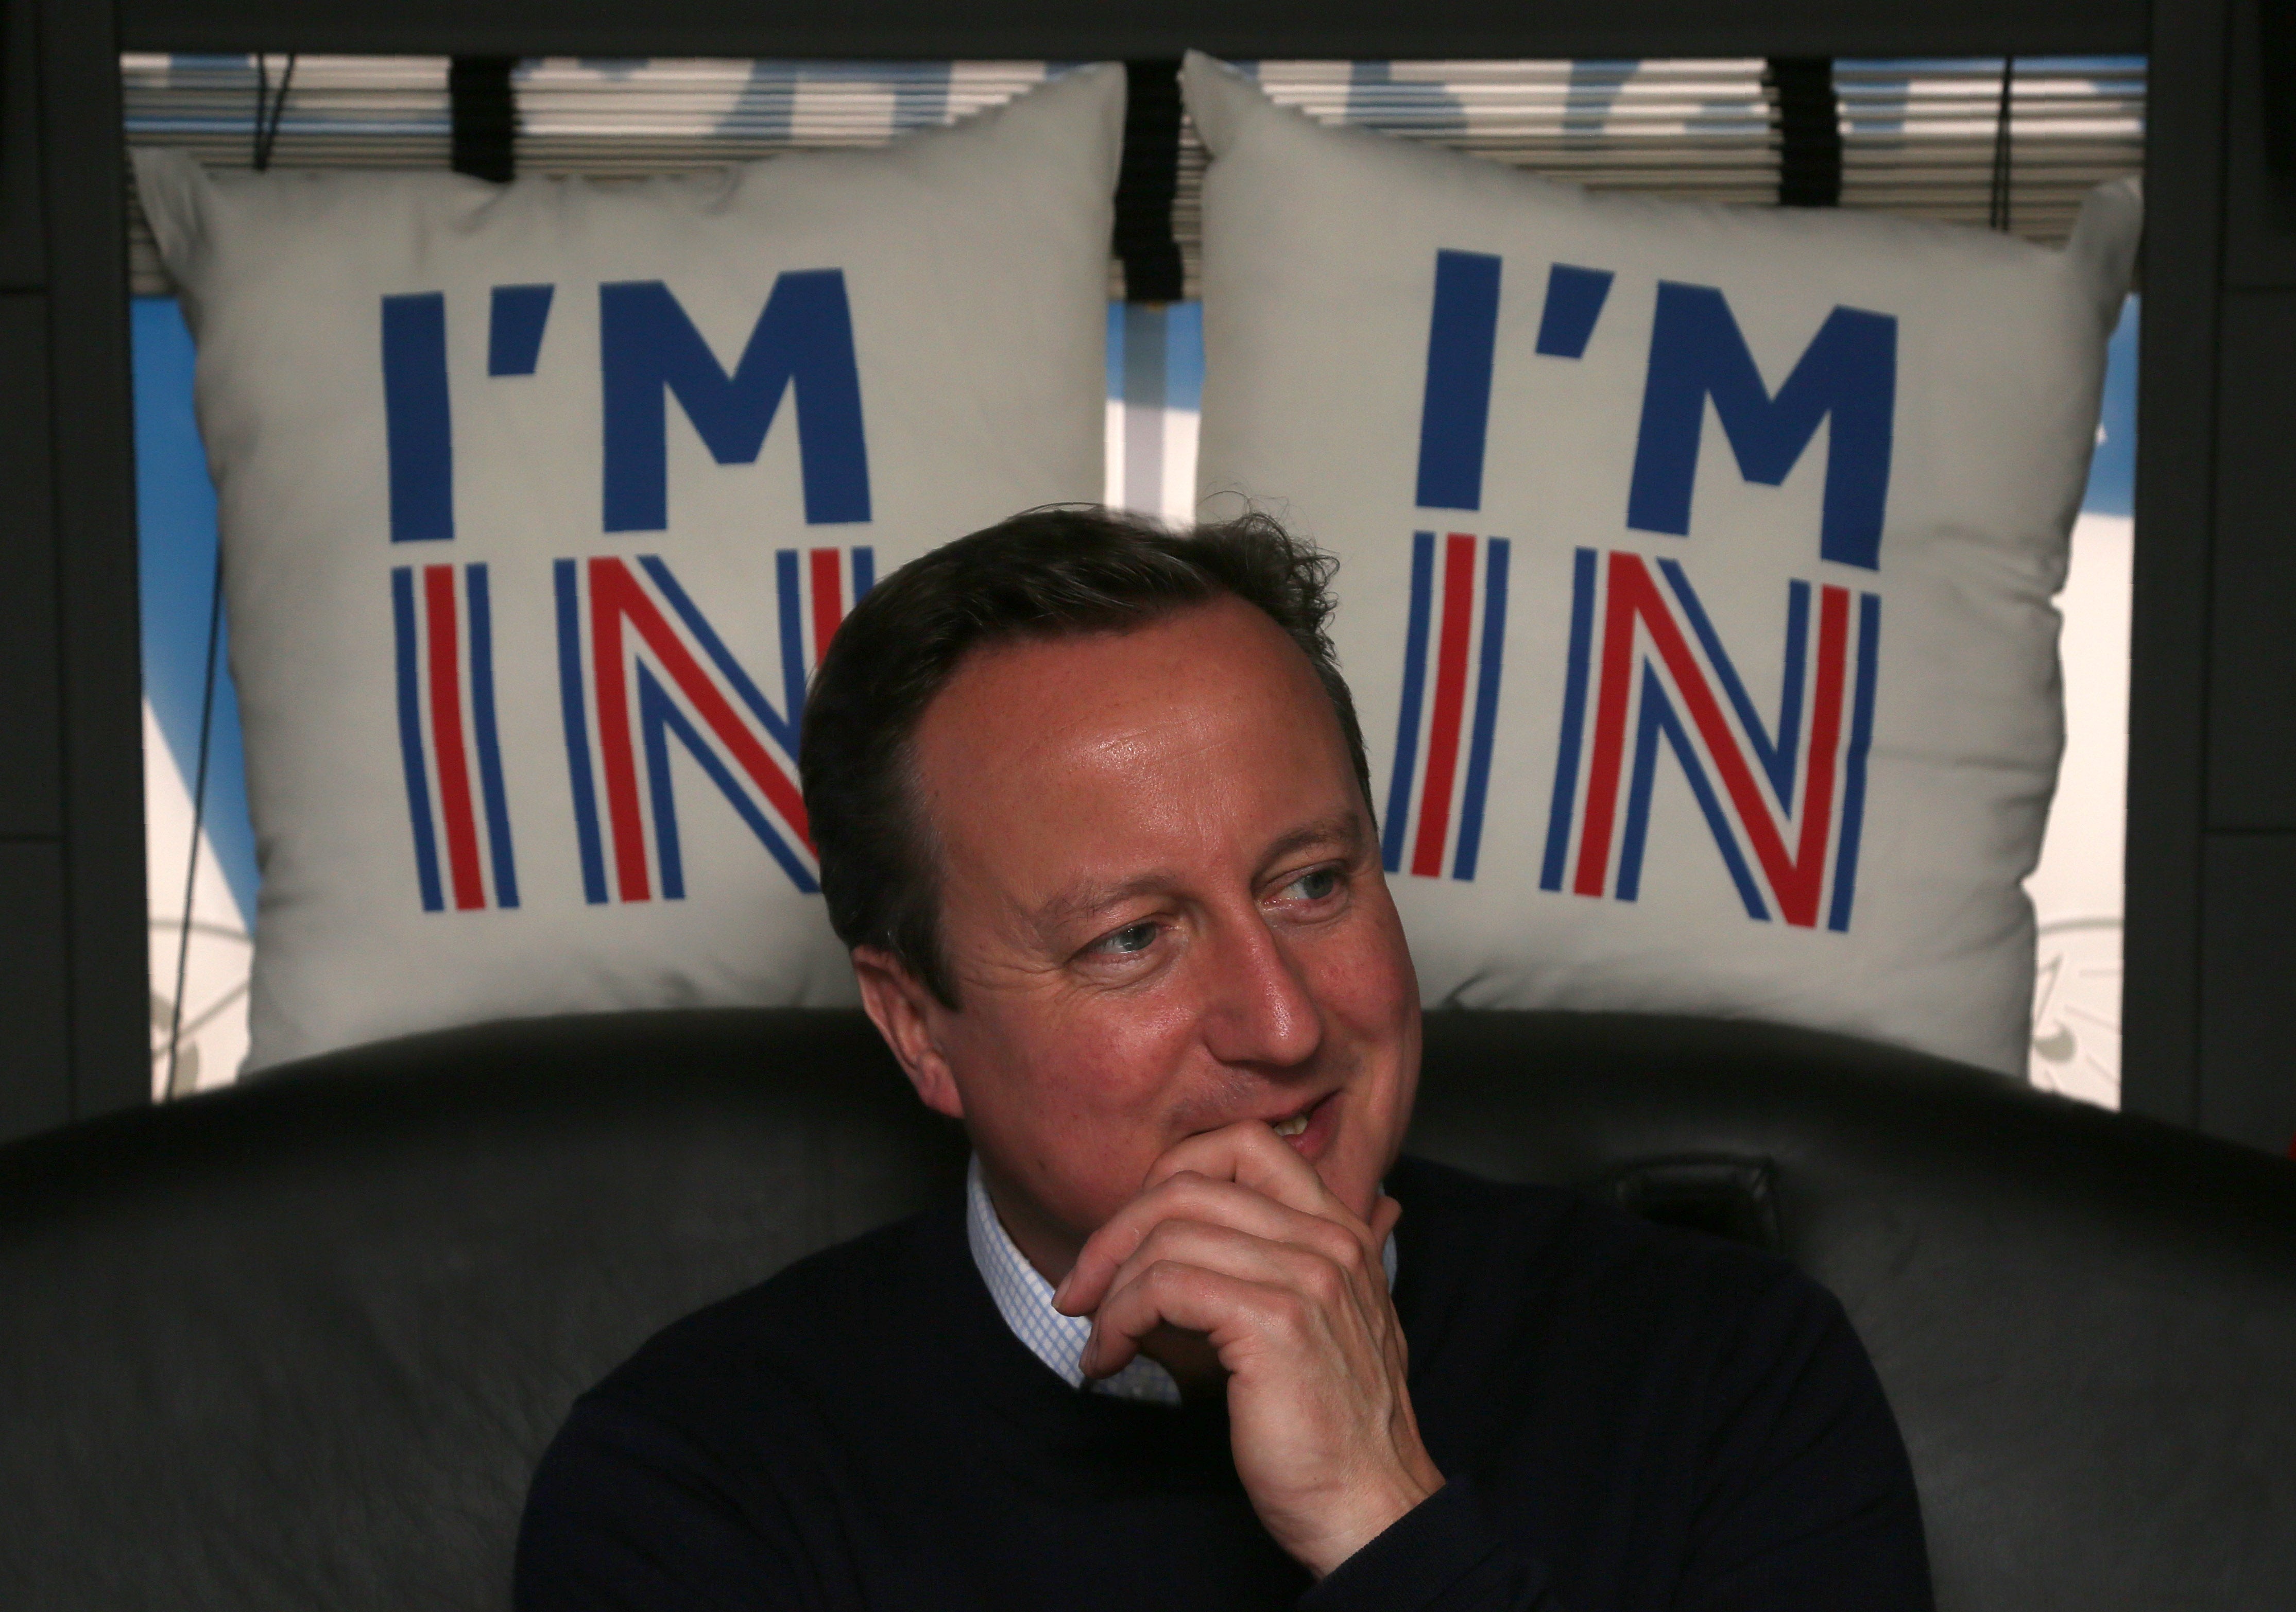 Cameron ‘didn’t dodge; he tried to grapple and resolve’